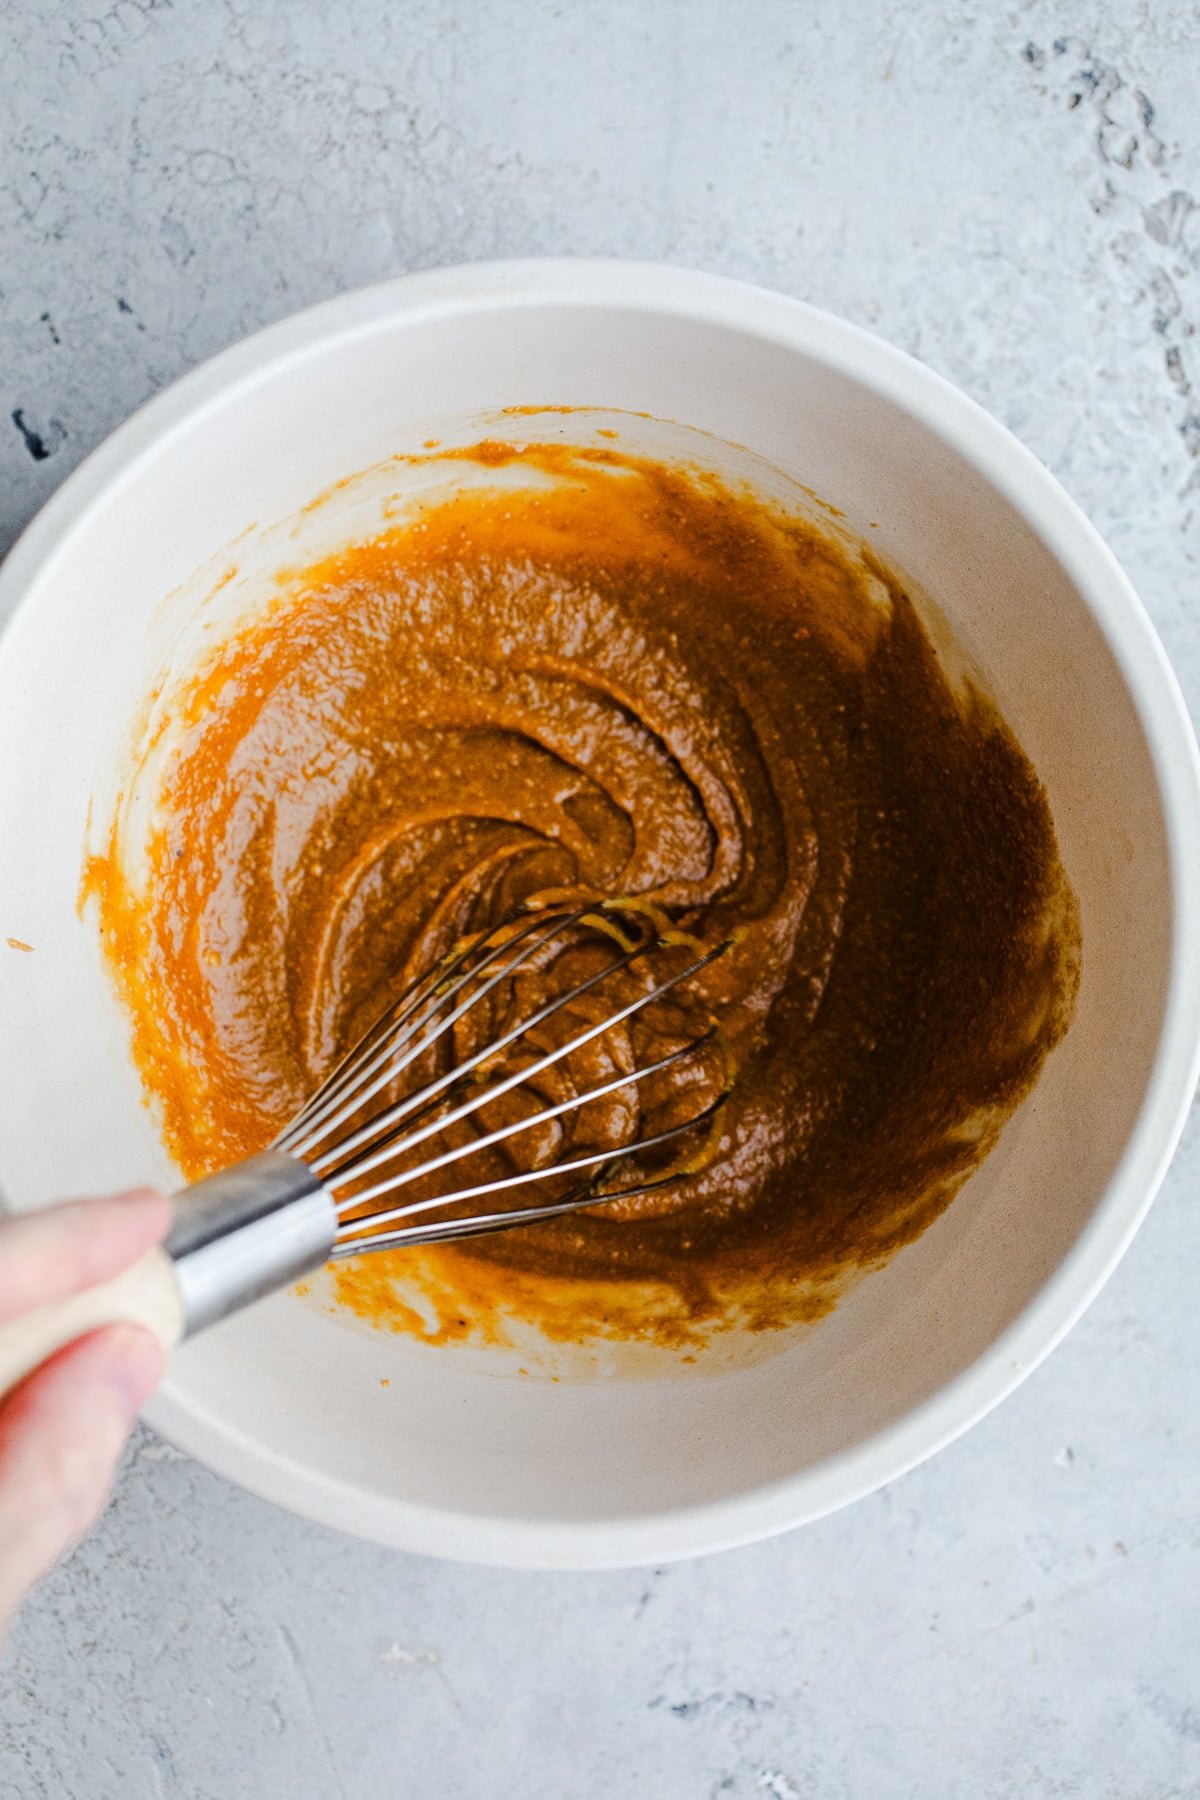 Peanut butter batter in a mixing bowl.